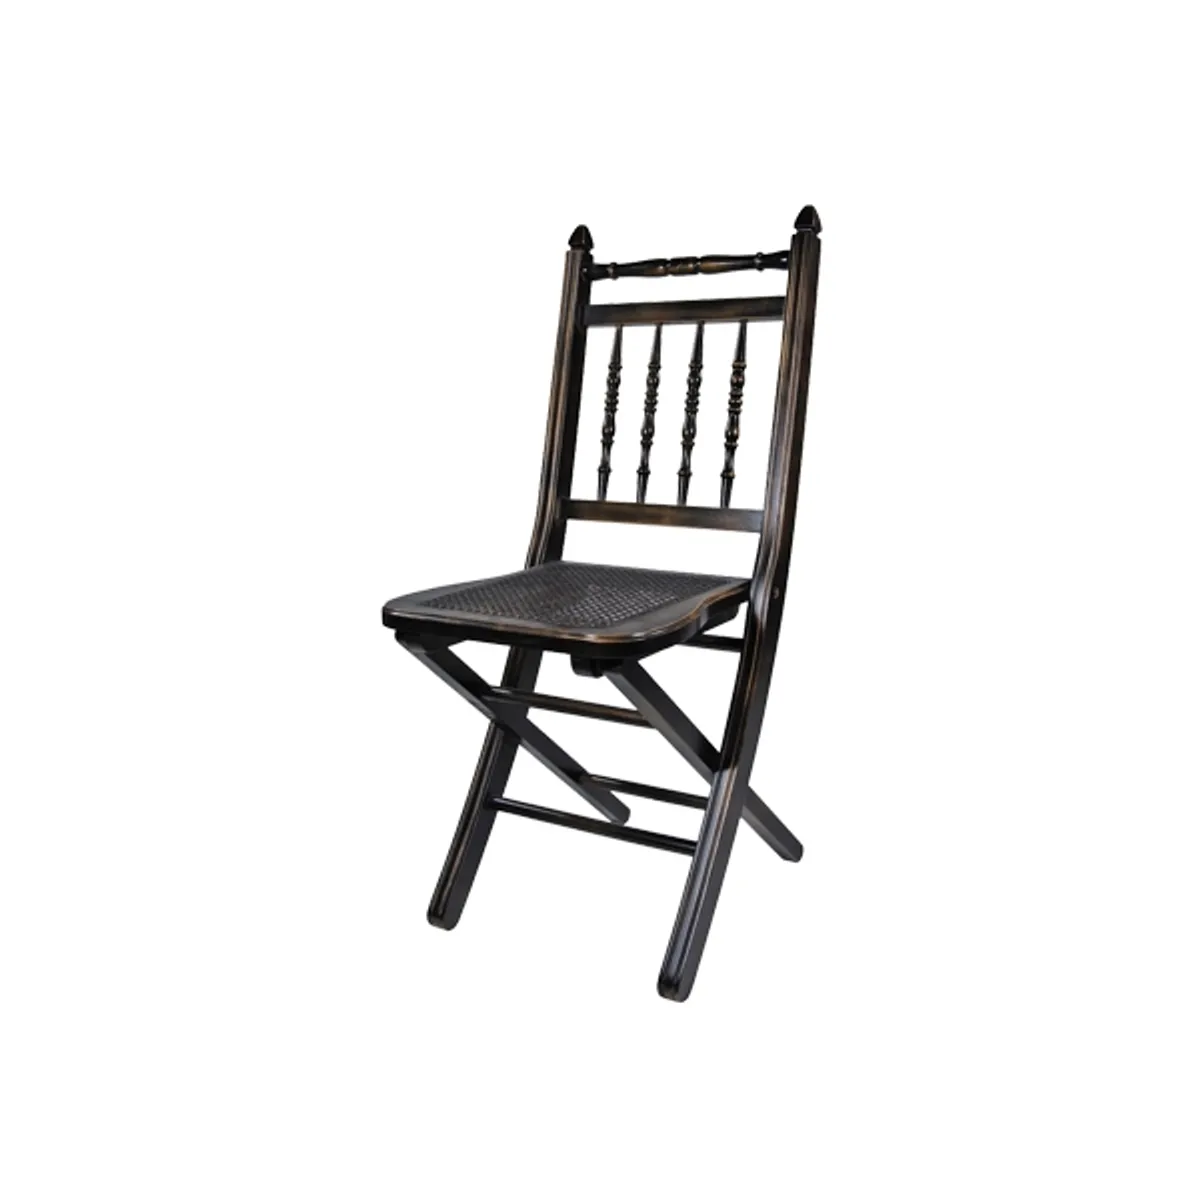 Court folding chair Inside Out Contracts